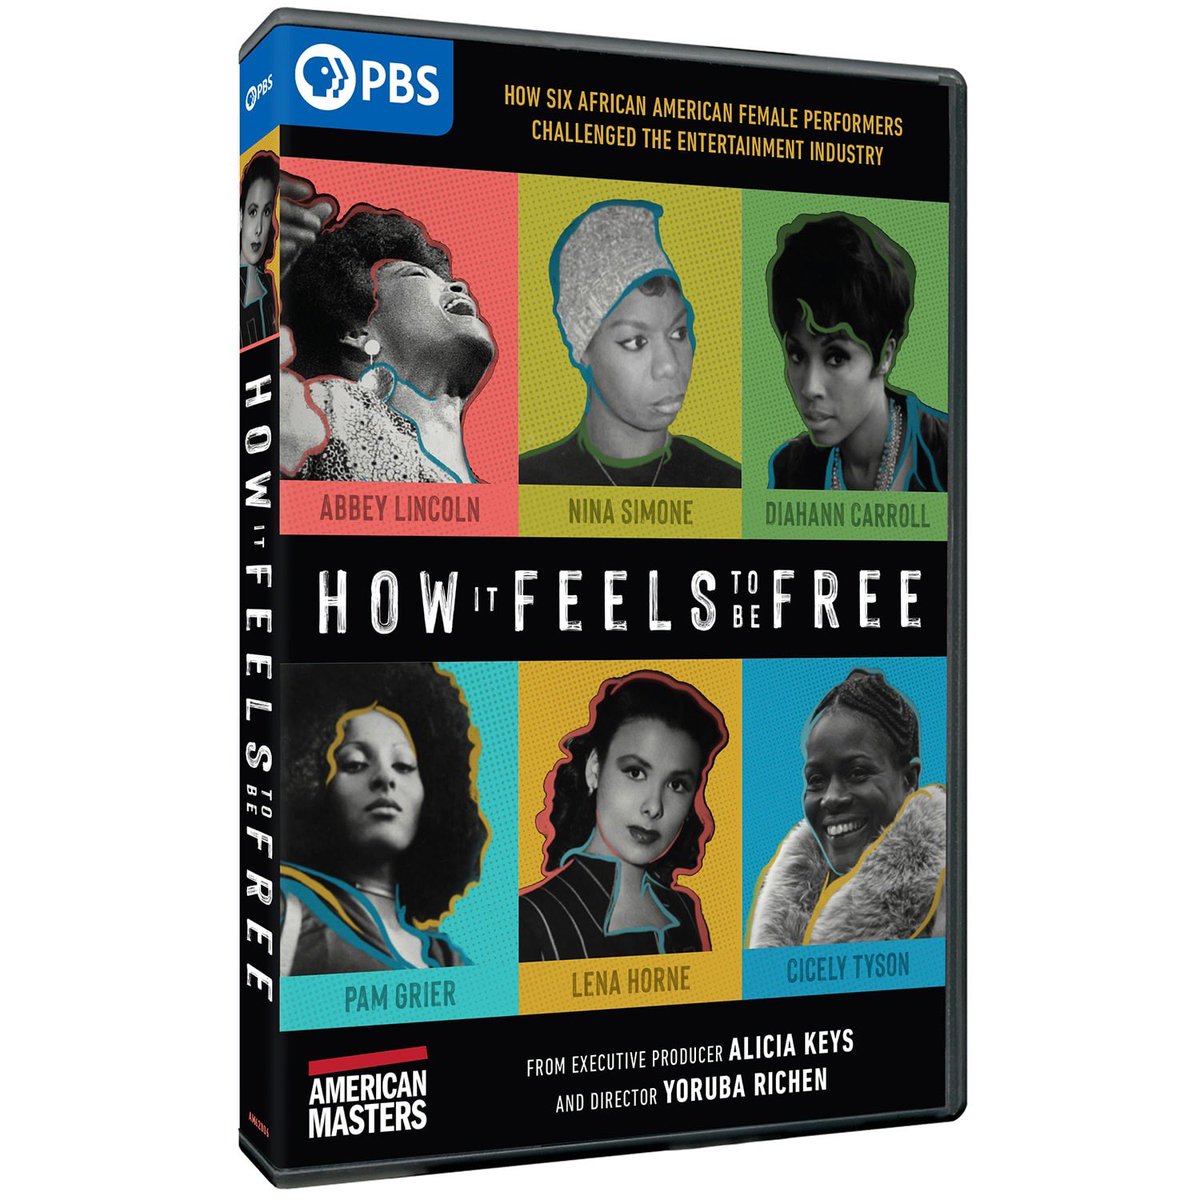 Wow! @PBSAmerMasters with an amazing doc! Just finished watching this and I truly believe these women were way ahead of their time but the lasting impact they had/have on the entertainment industry is incredible. Still paving ways for women & men alike 🙏🏾 #HowItFeelsToBeFree